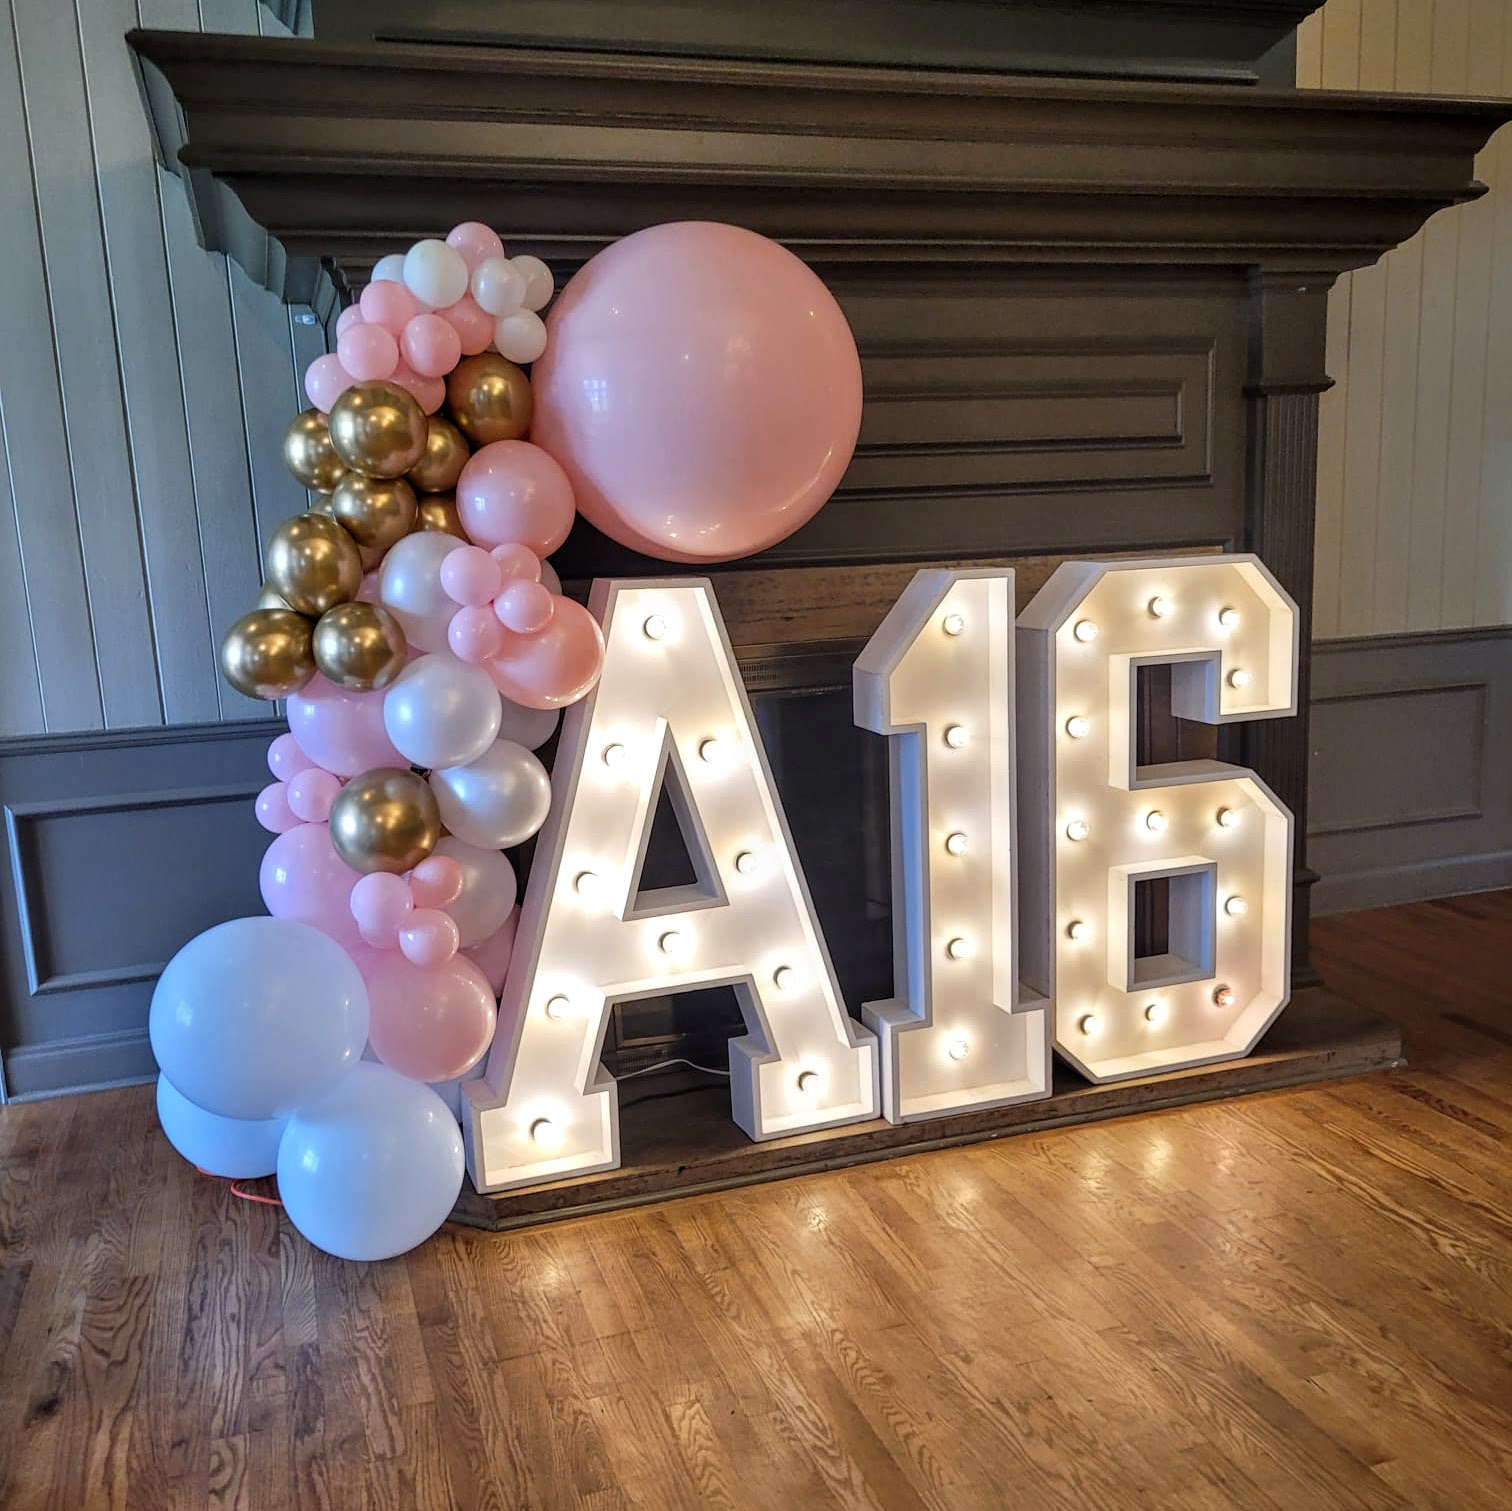 How Much To Rent Marquee Letters